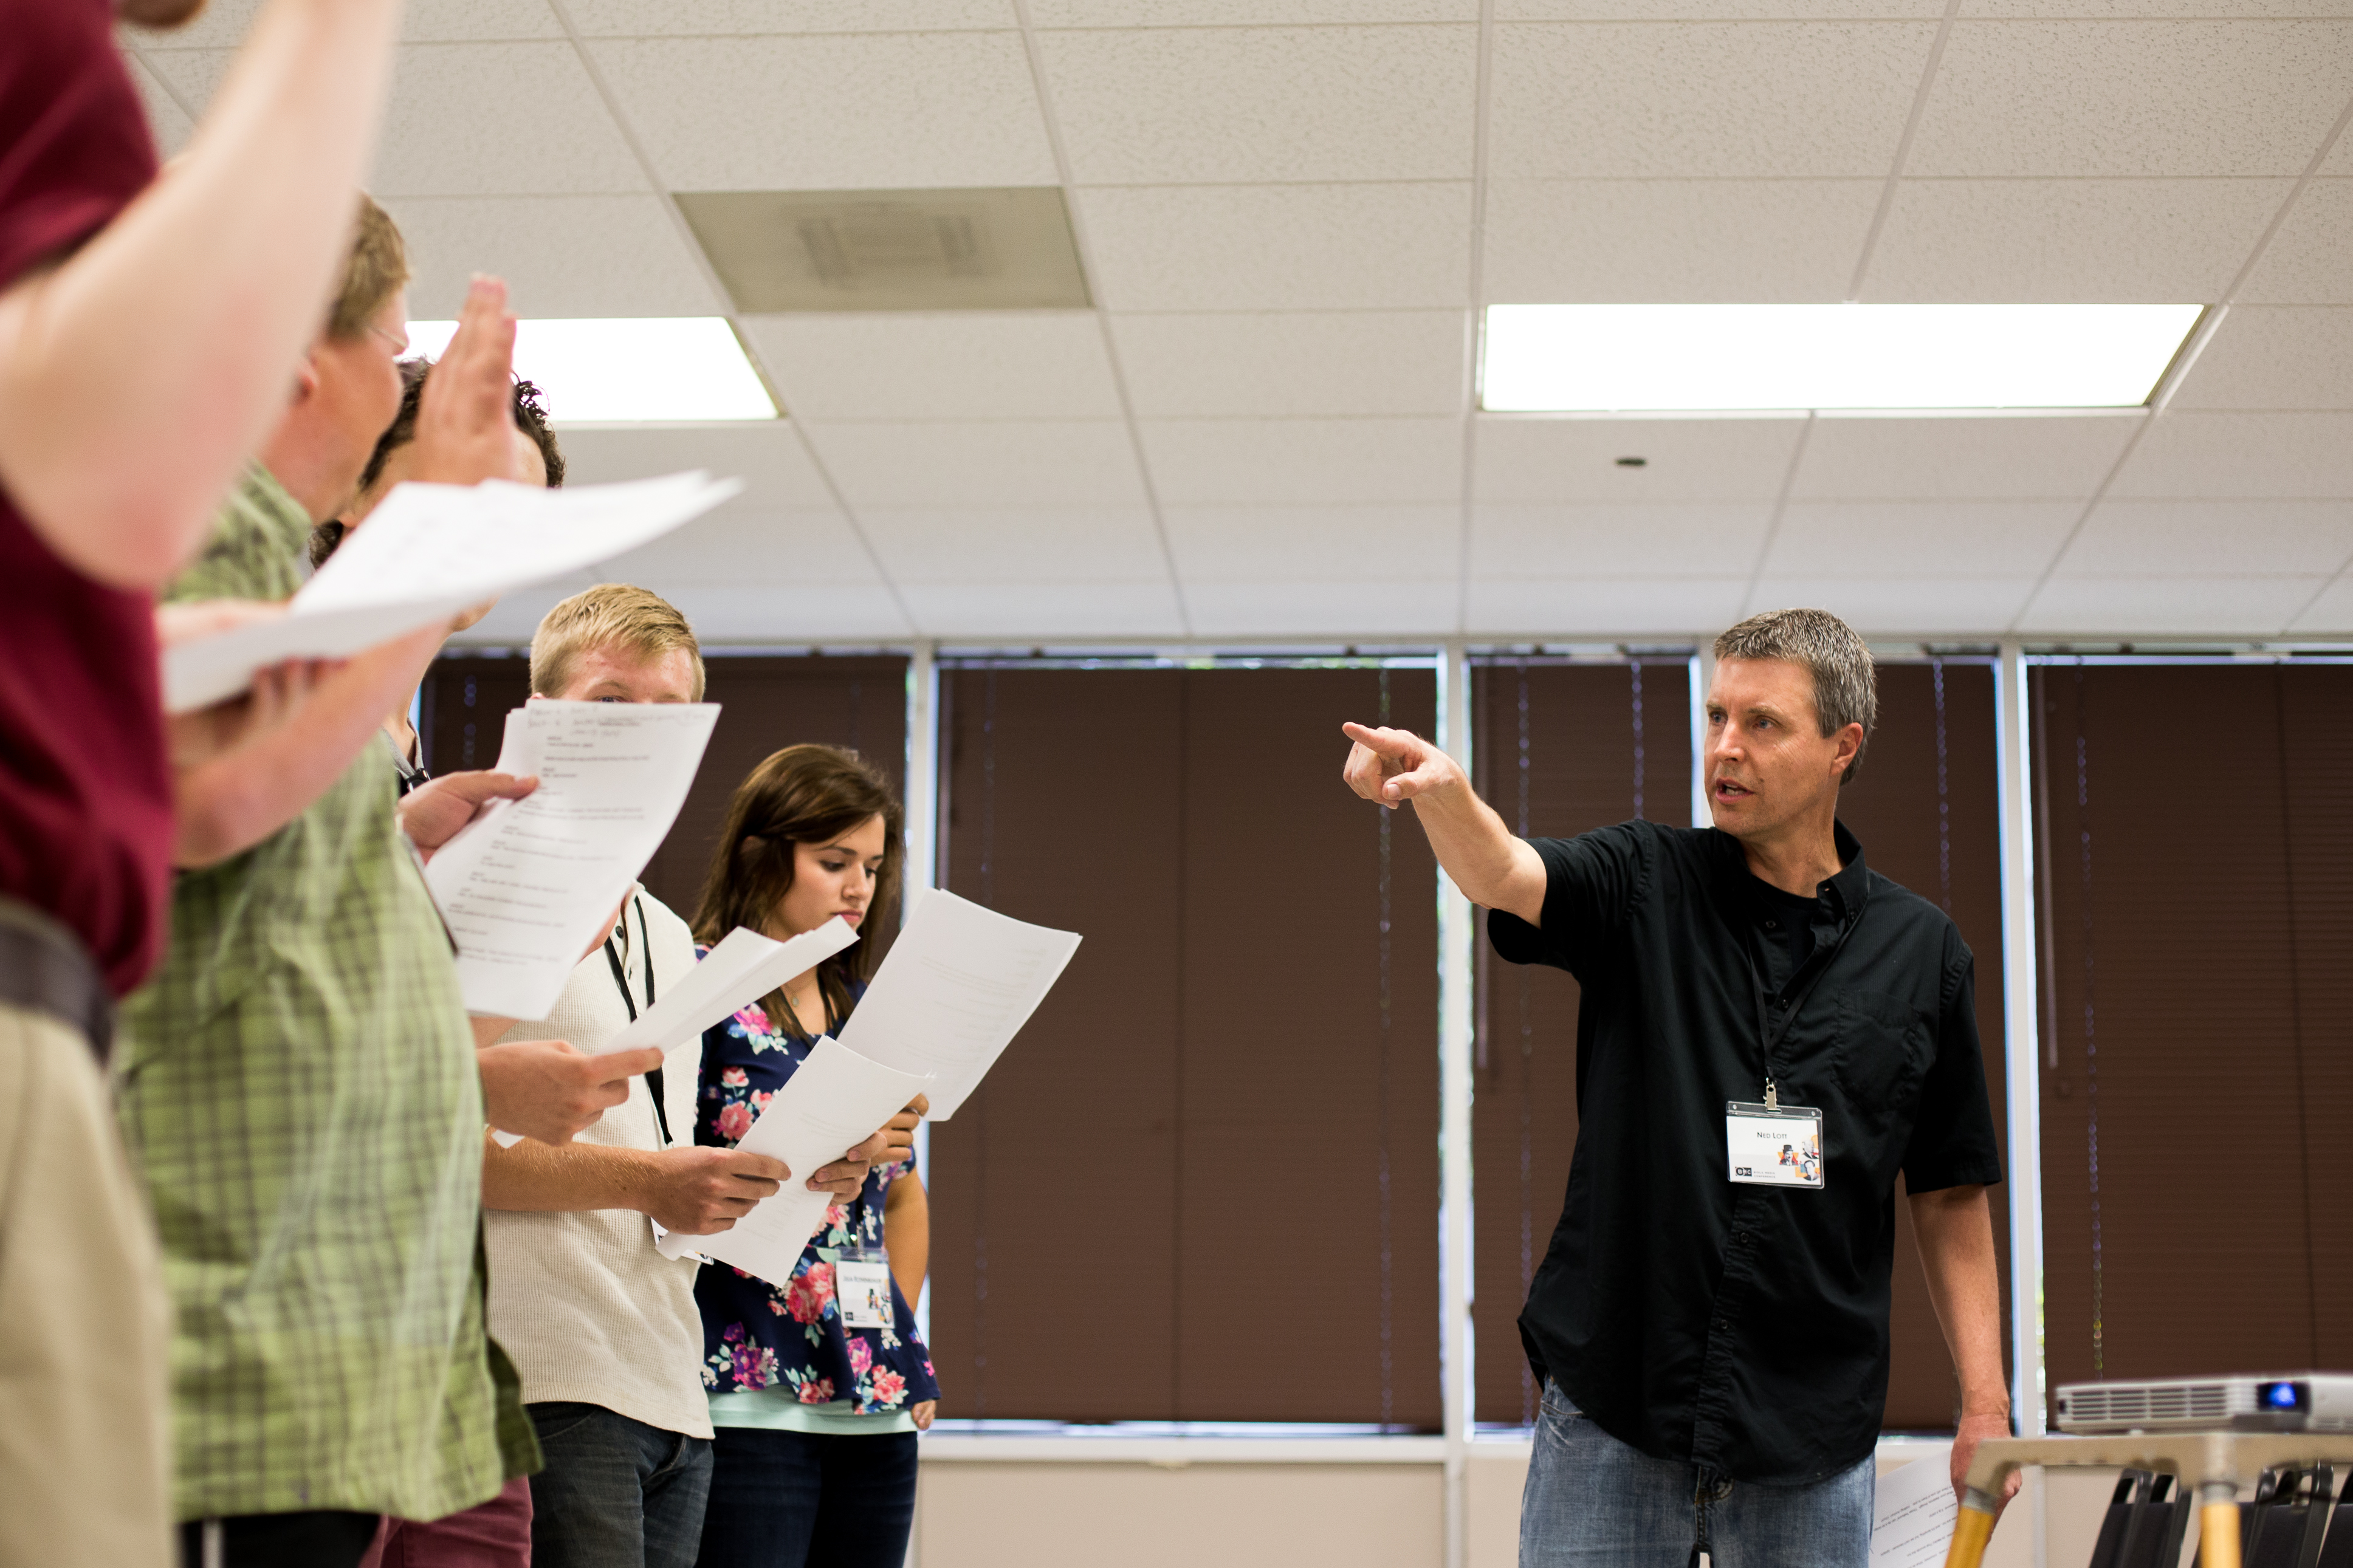 Voice actor director Ned Lott gives a lesson about voice directing by inviting attendees to act out scenes from famous animated movies during a breakout session. | John Buchanan/THE CHIMES